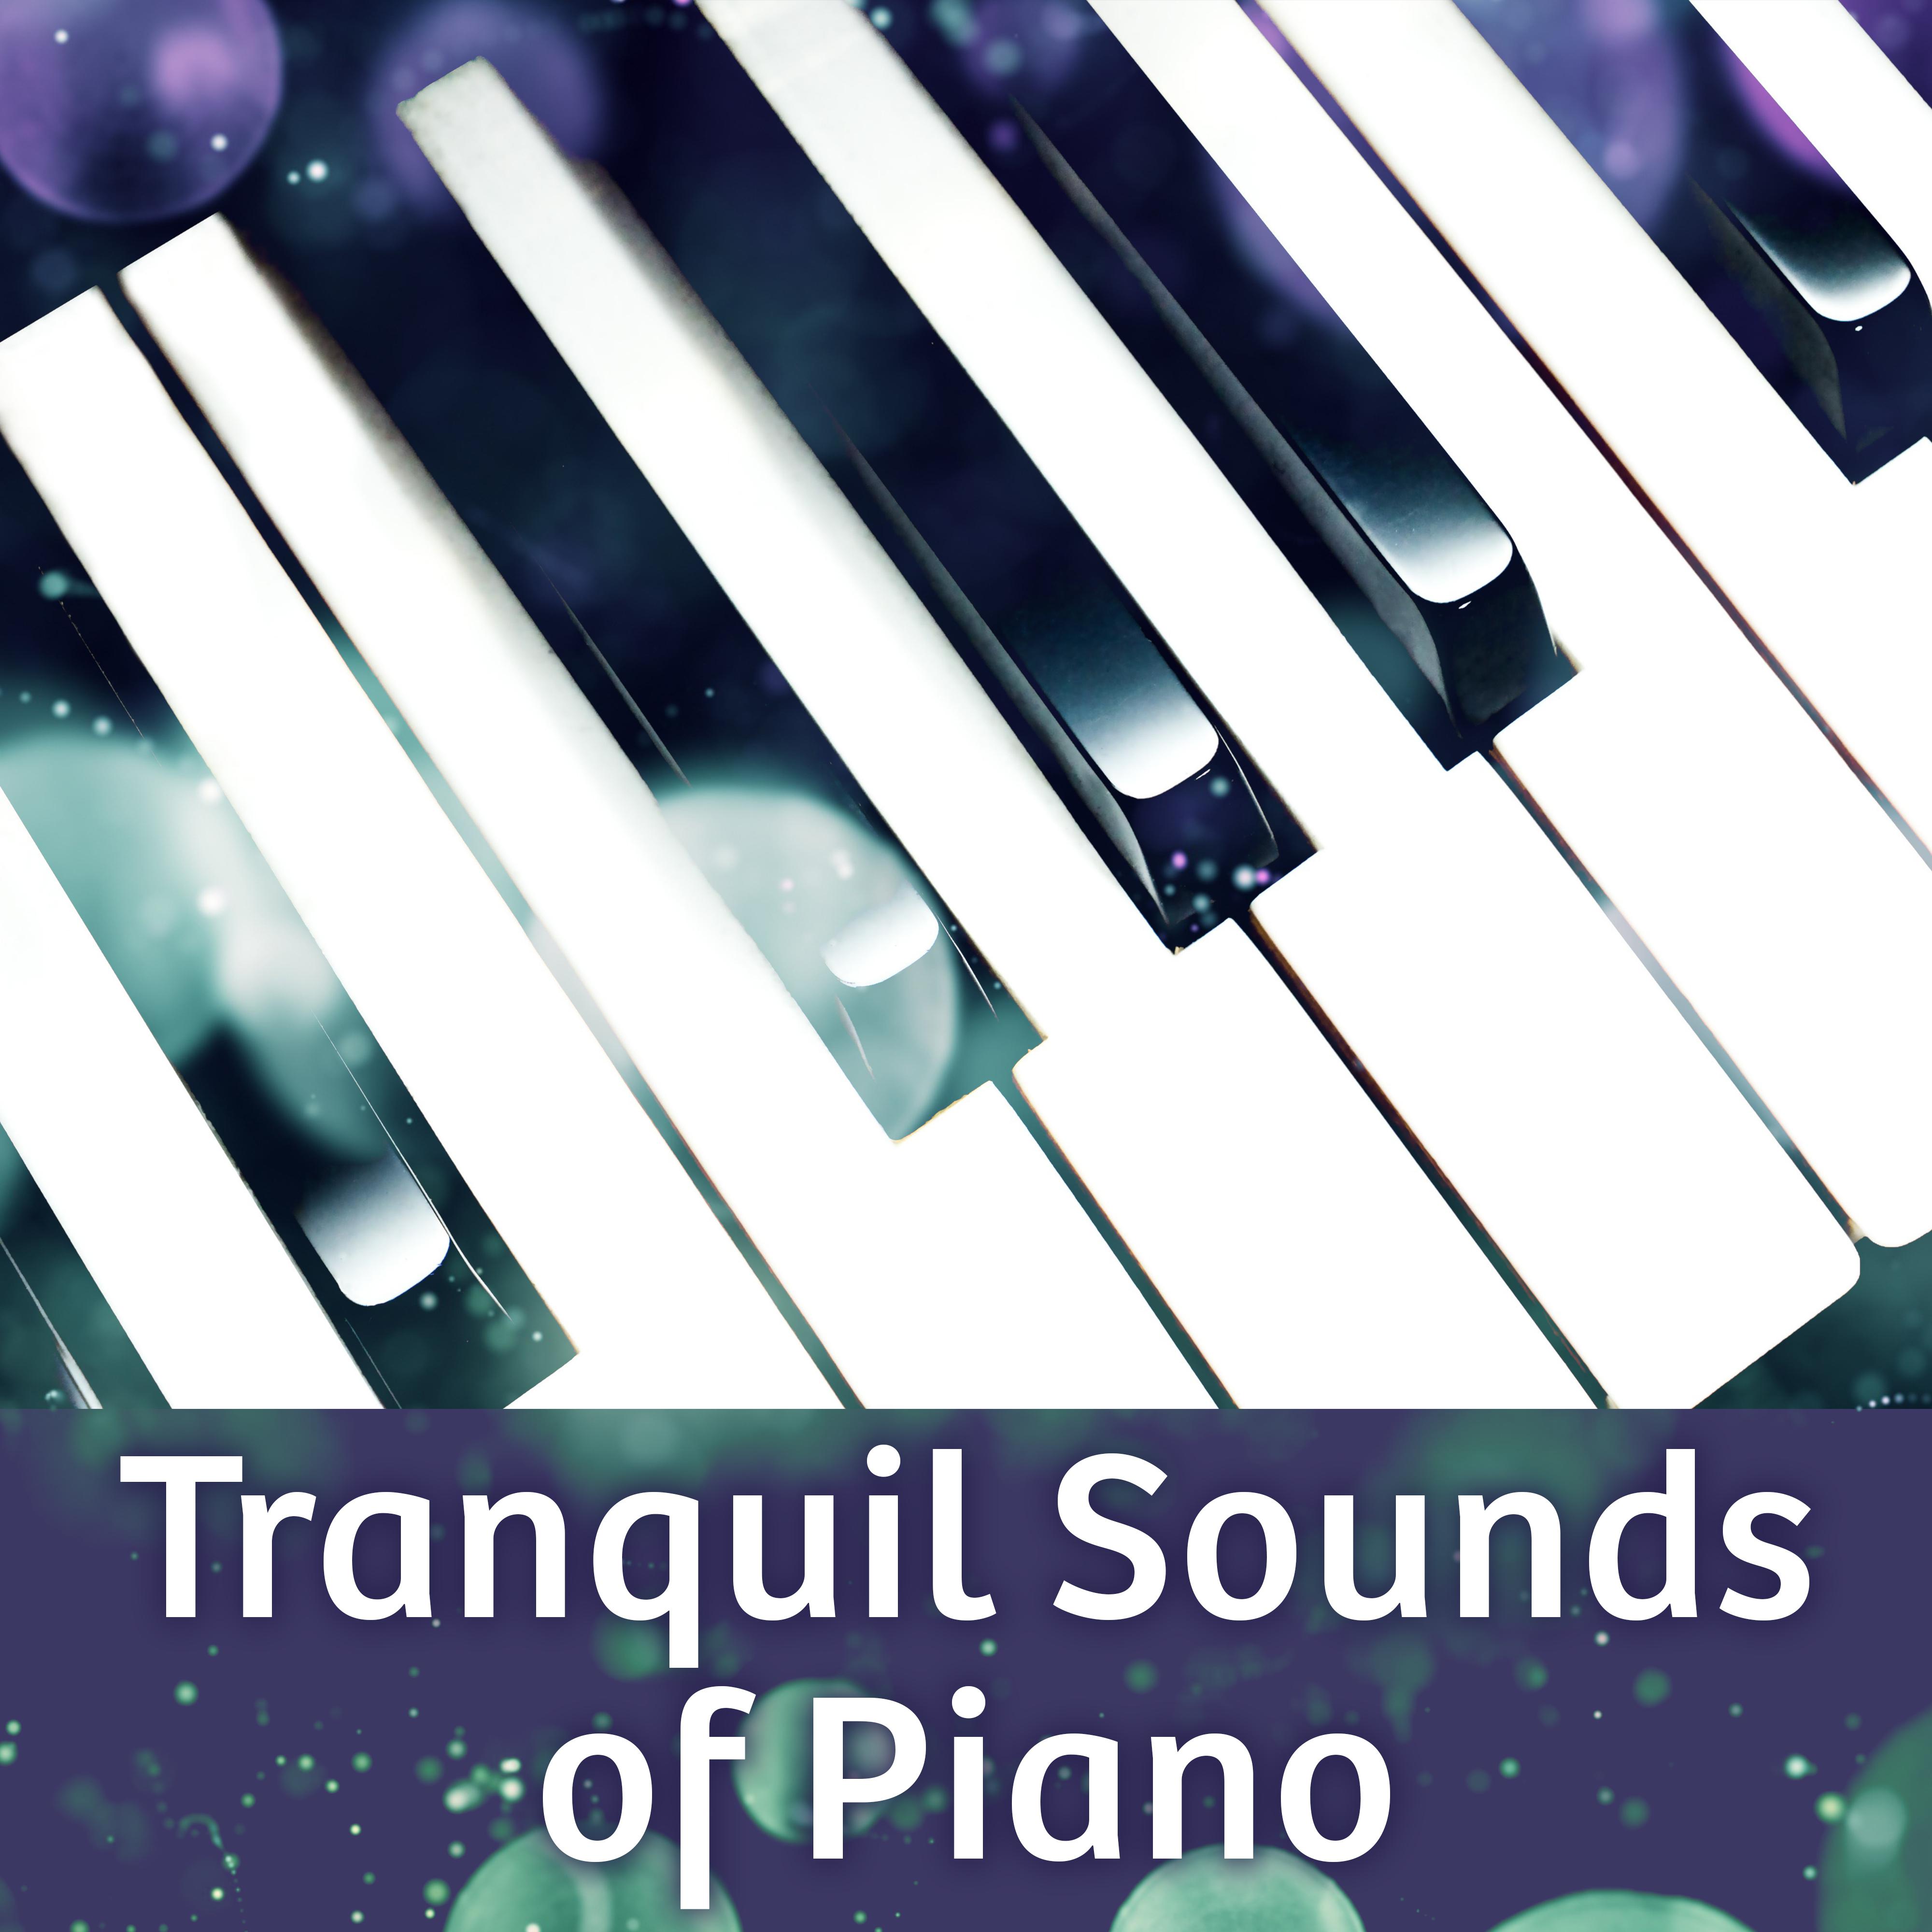 Tranquil Sounds of Piano  Relaxation Jazz Music, Deep Sleep, Soft Melodies, Instrumental Piano, Smooth Jazz, Peaceful Mind